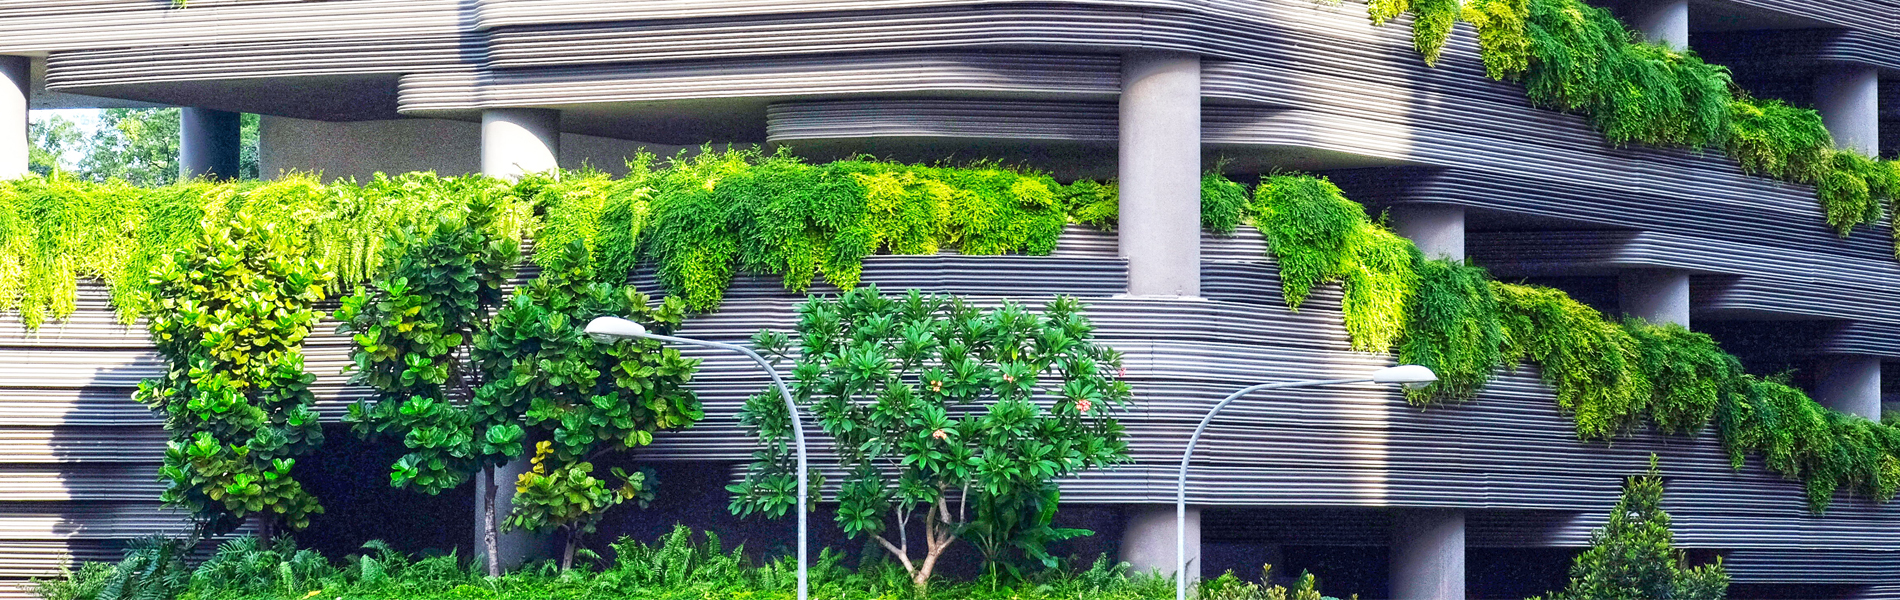 Modern building with a lot of green leafs and trees | Coor